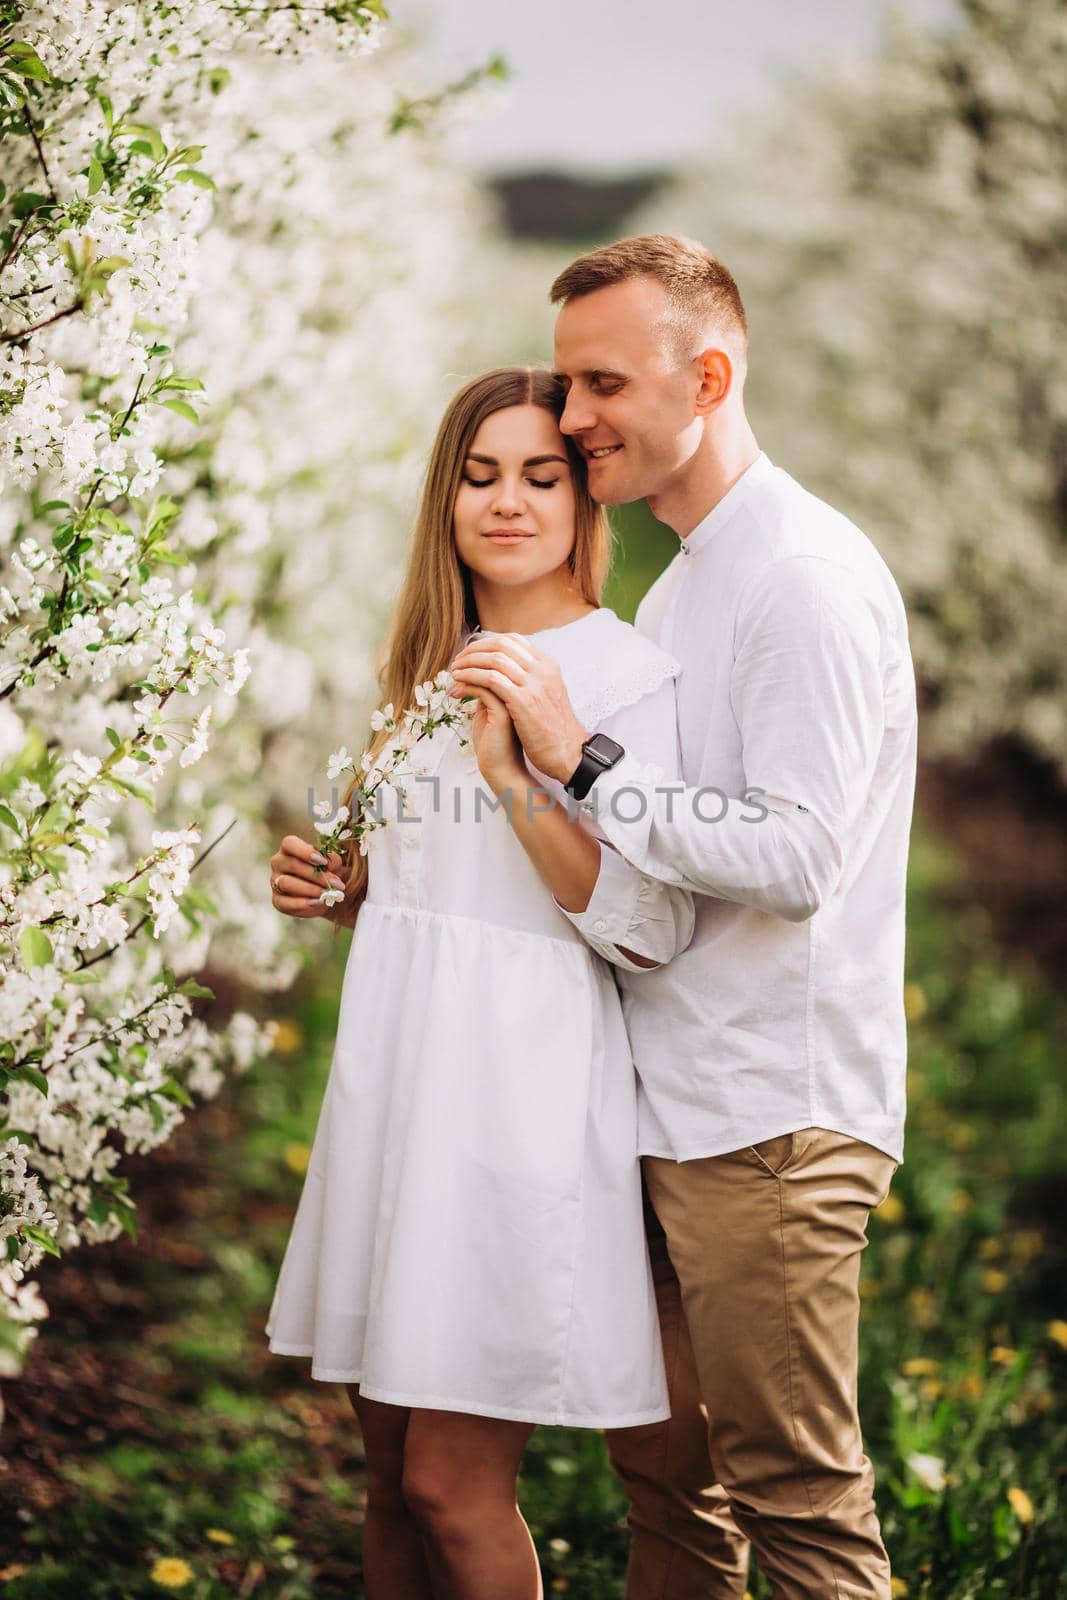 A happy young couple in love stands in a garden of blooming apple trees. A man in a white shirt and a girl in a white light dress are walking in a flowering park